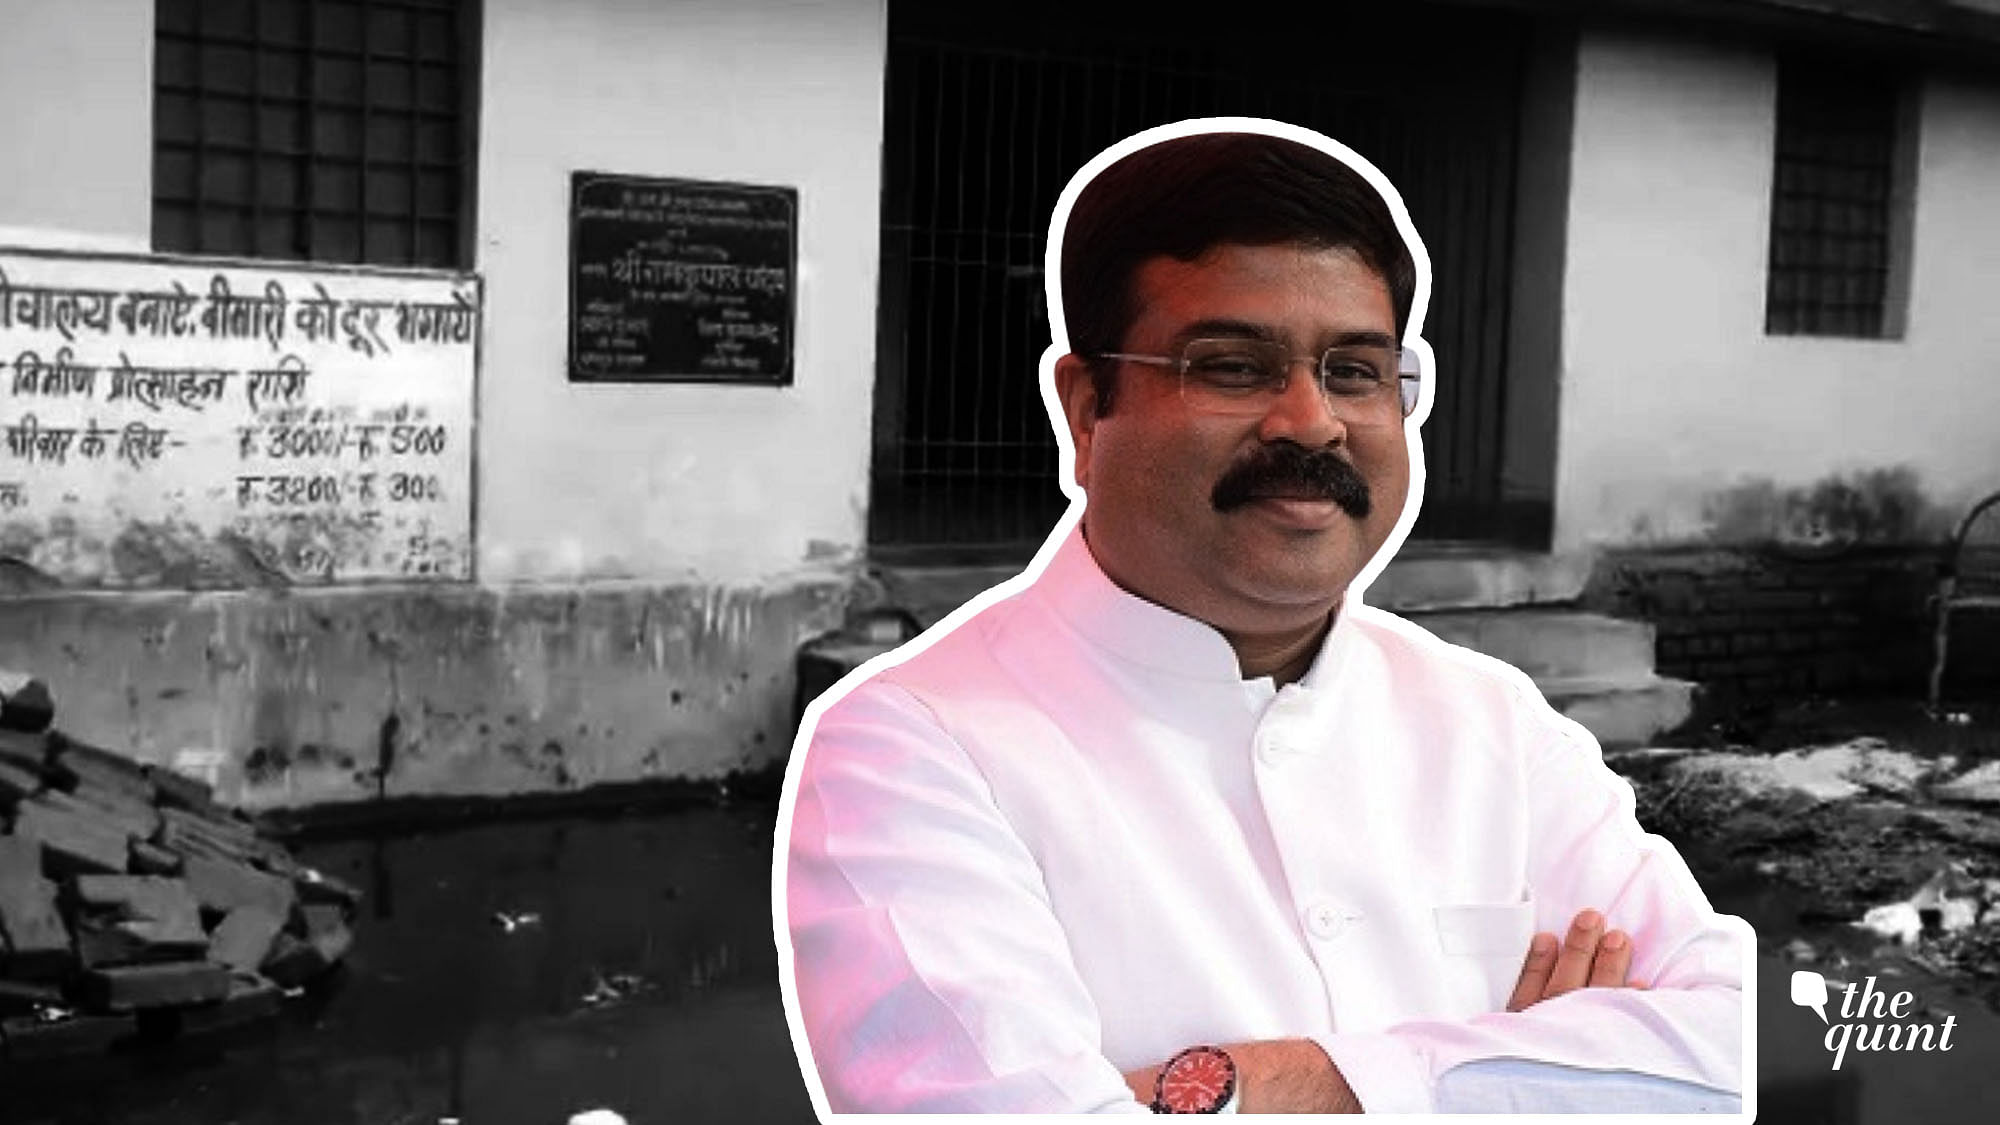 Residents of Lakhani Bigha complained of having been cheated as MP Dharmendra Pradhan had made several promises after adopting the village, but didn’t fulfil them.